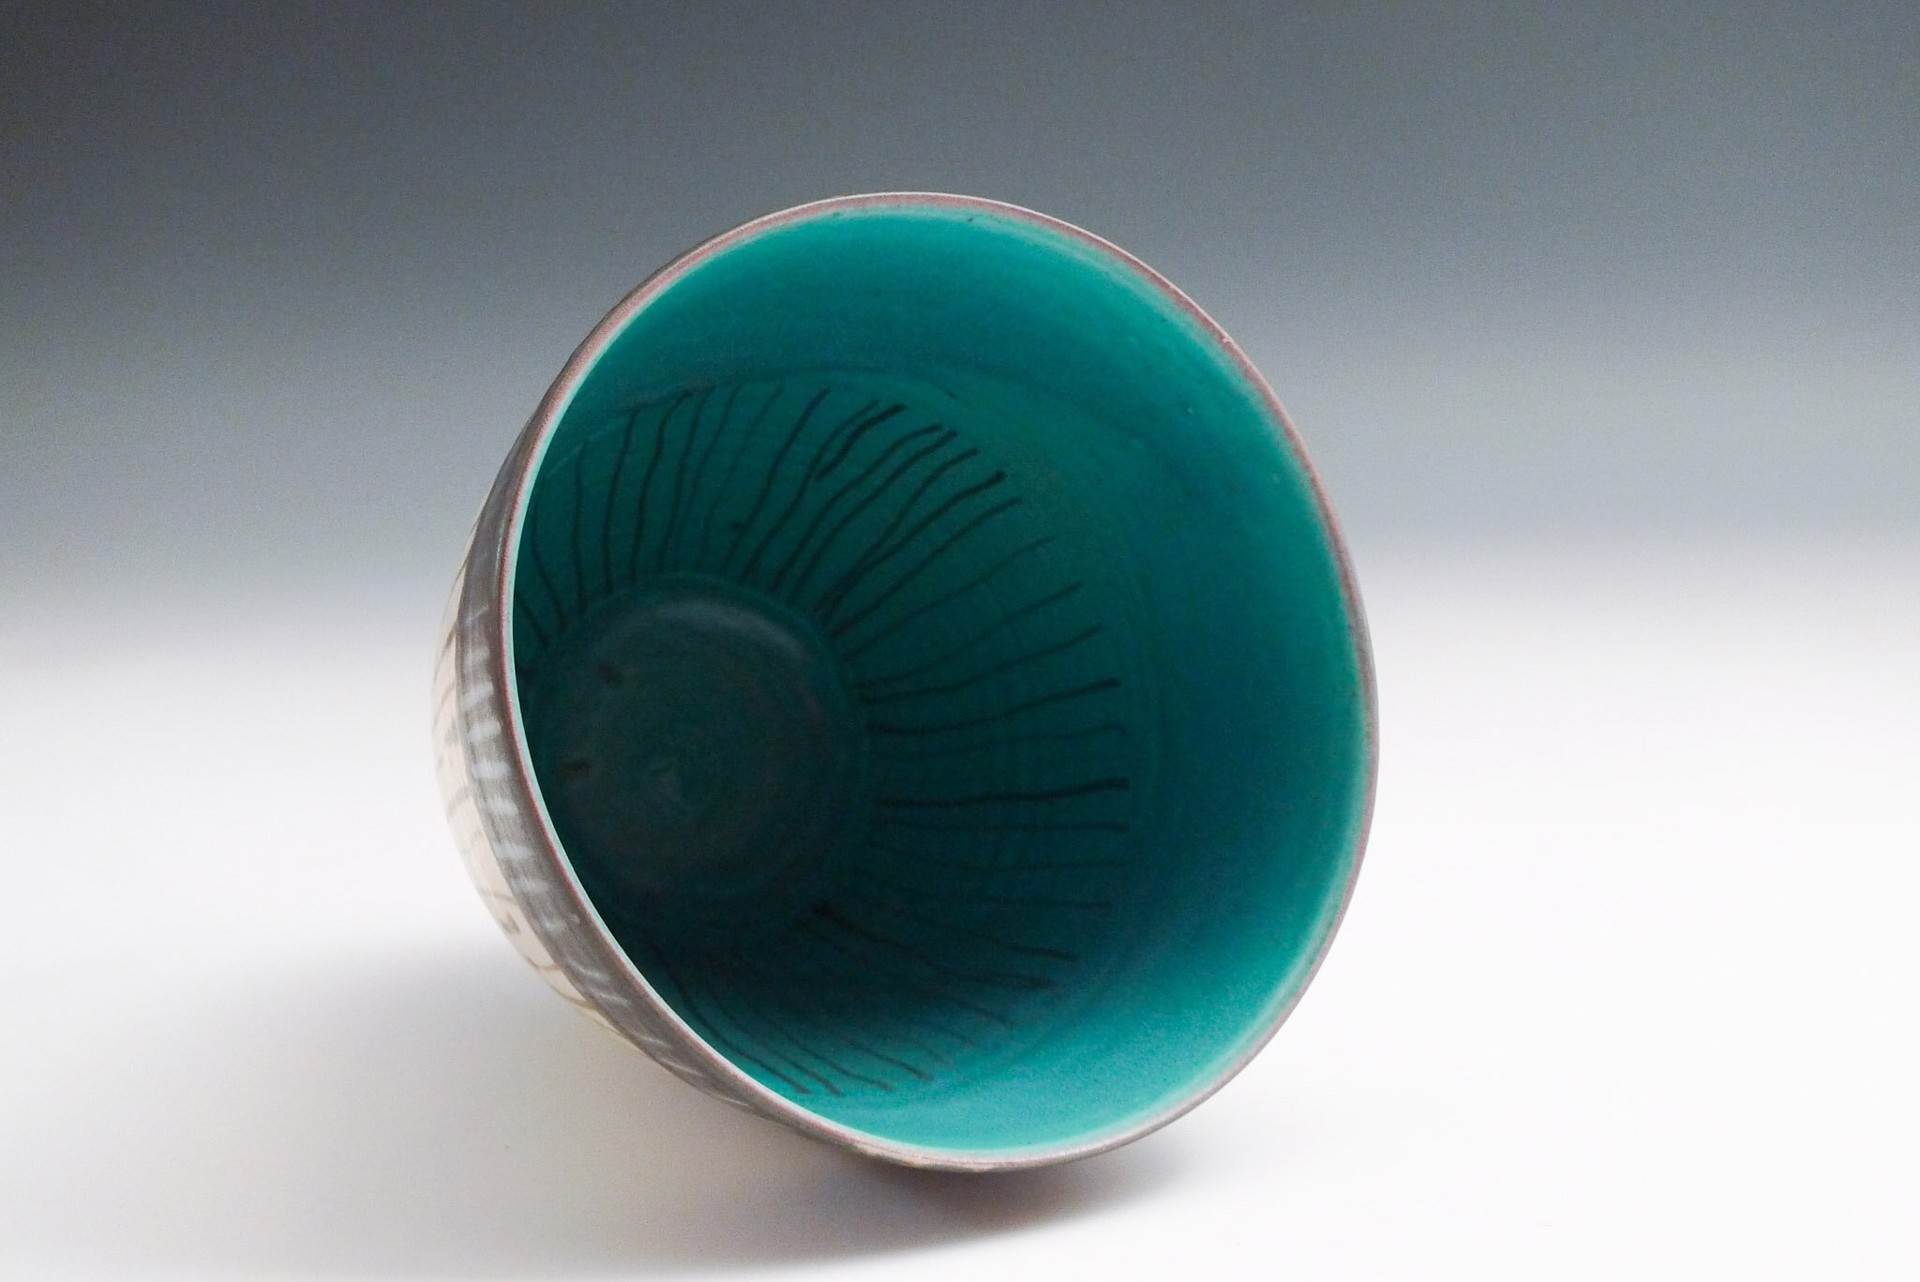 Pattern Bowl by Delores Fortuna